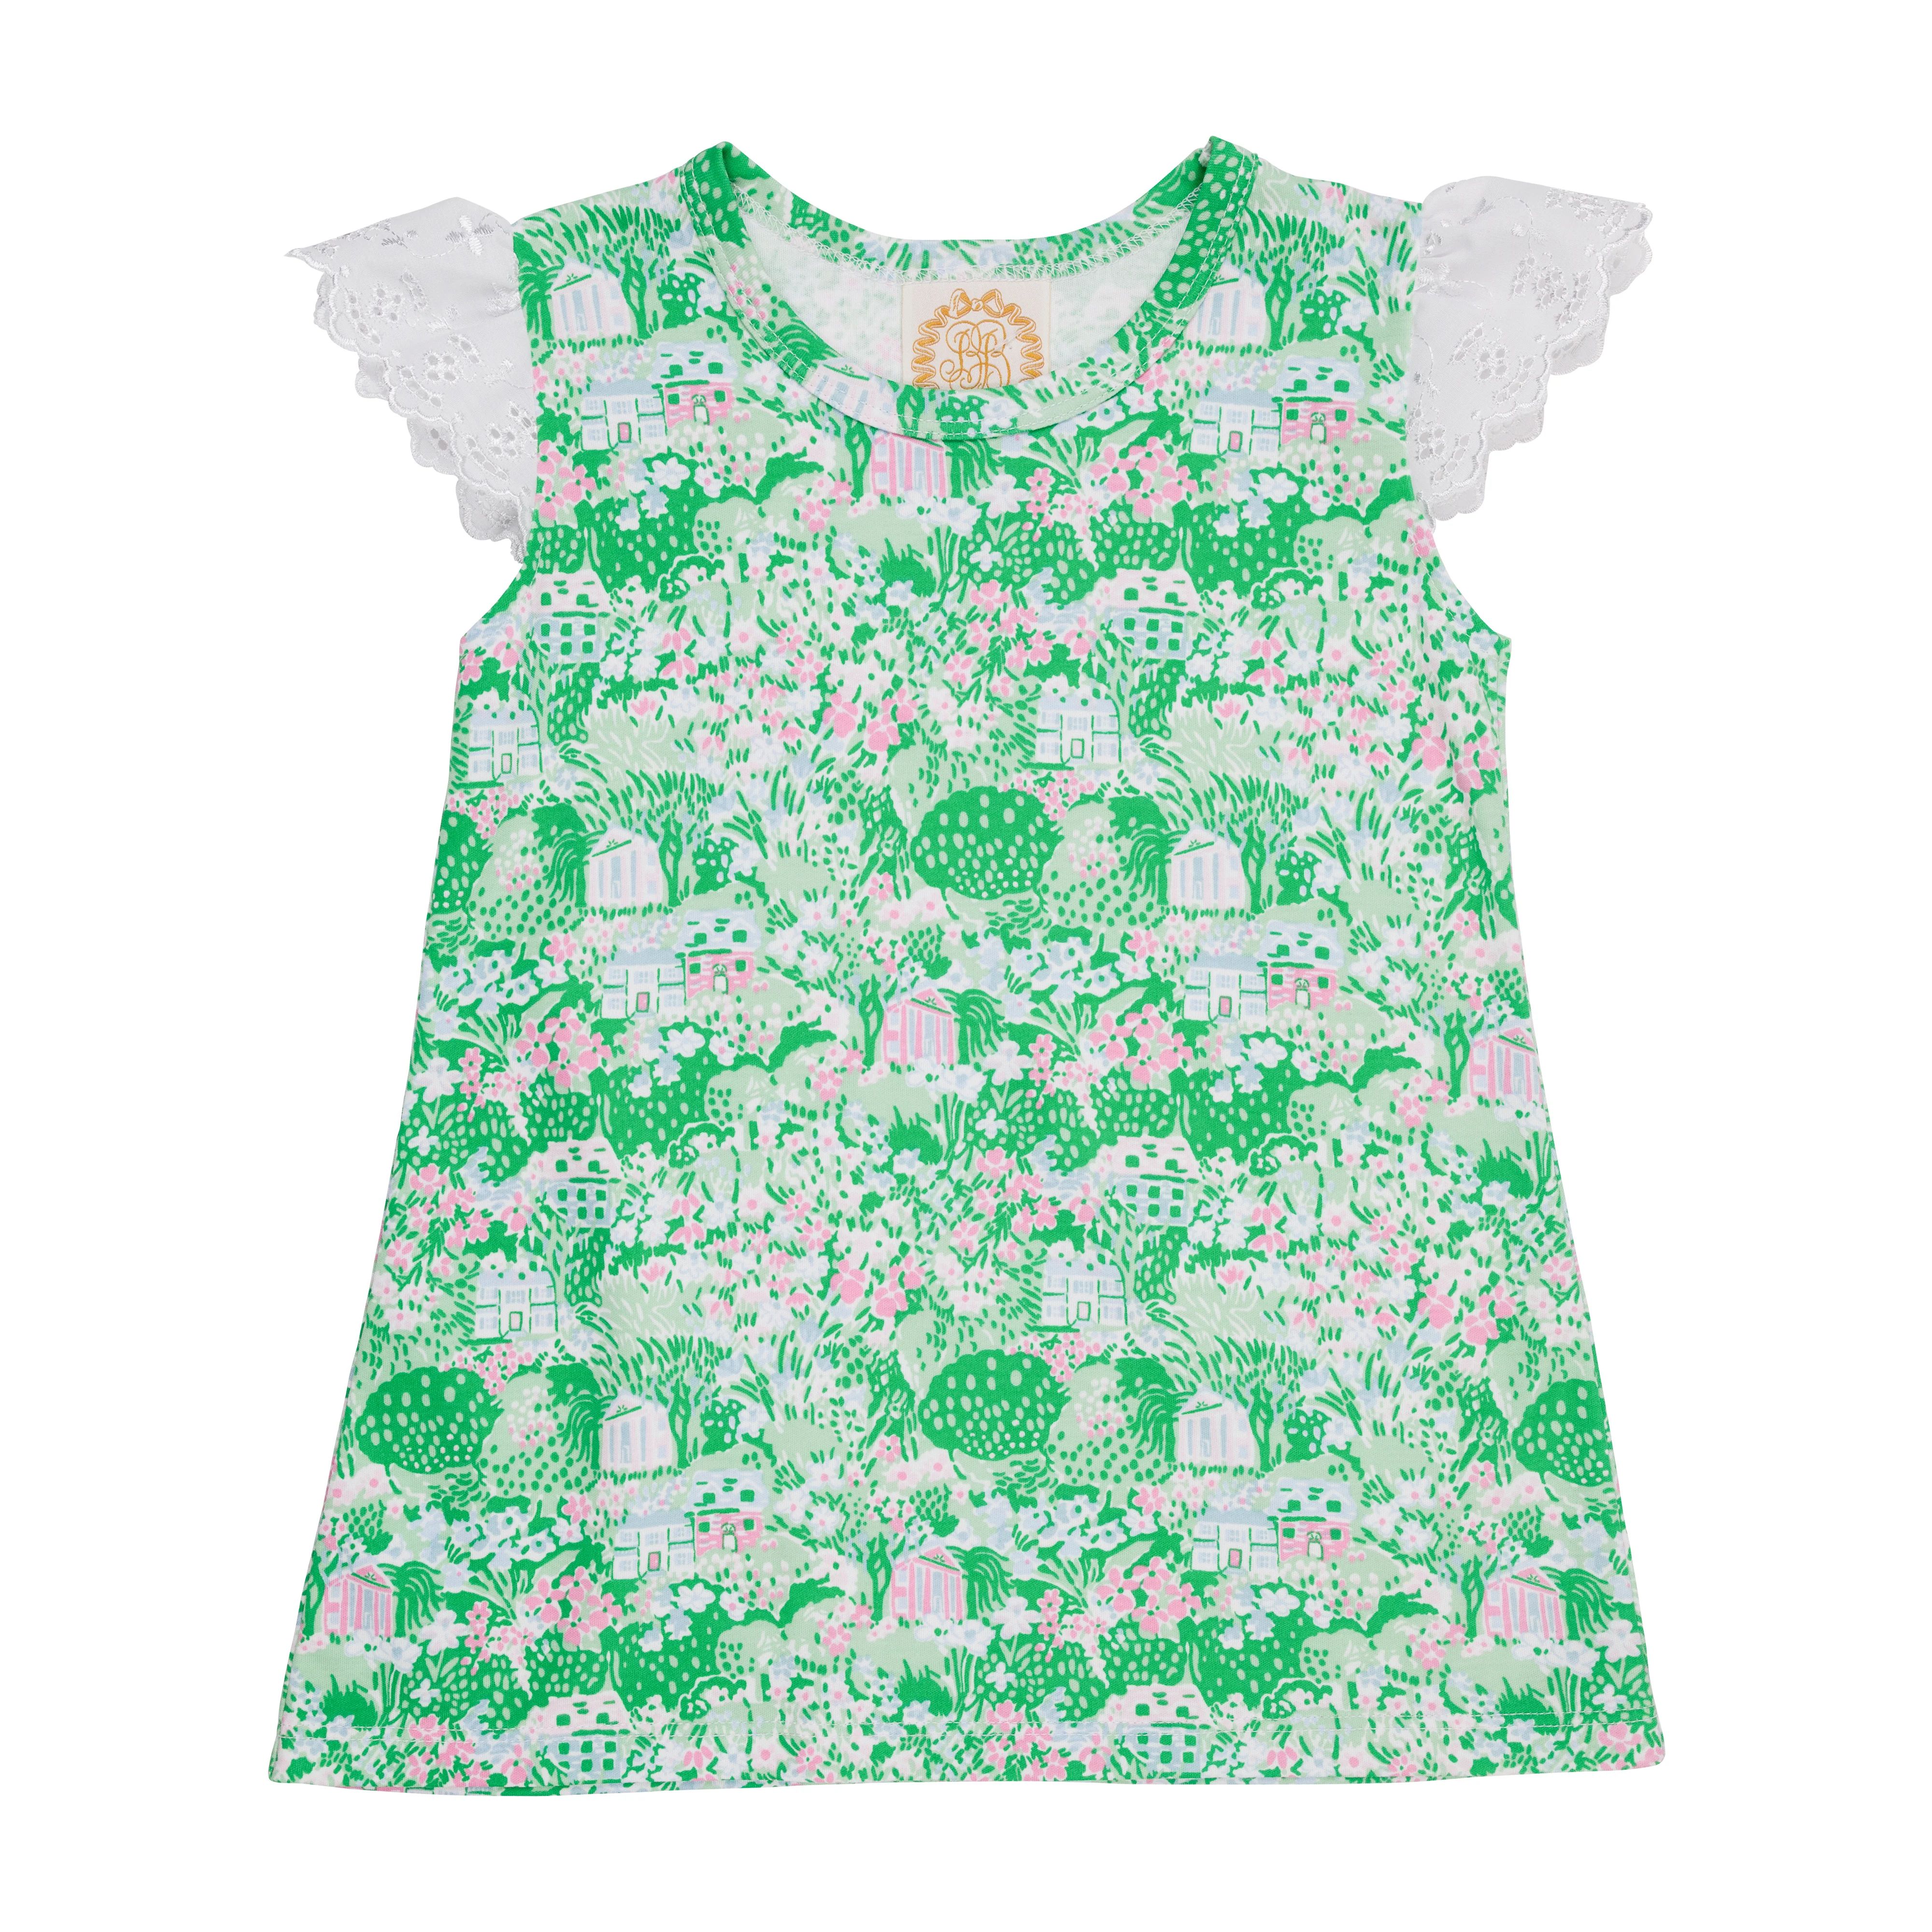 Sleeveless Polly Play Shirt - Belmont Blooms with Worth Avenue White Eyelet | The Beaufort Bonnet Company